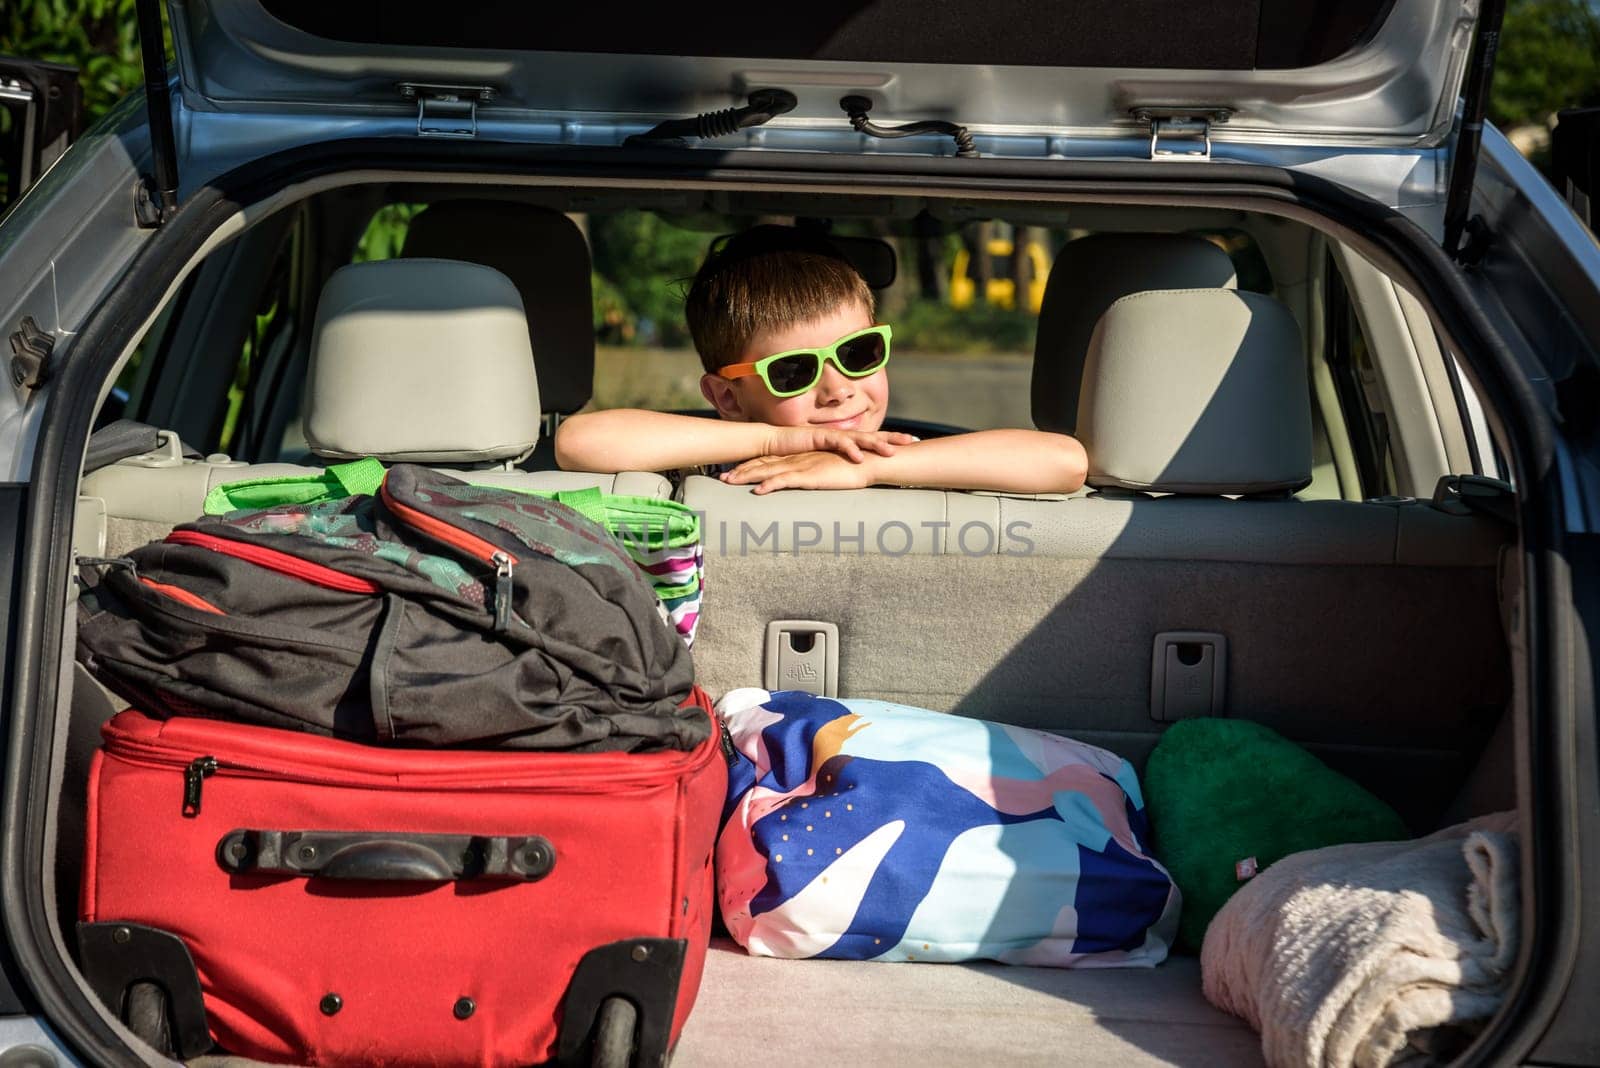 Adorable kid boy wearing sunglasses sitting in car trunk. Portrait of Happy child with open car boot while waiting for parent get ready for vocation. Family trip traveling by car concept by Kobysh